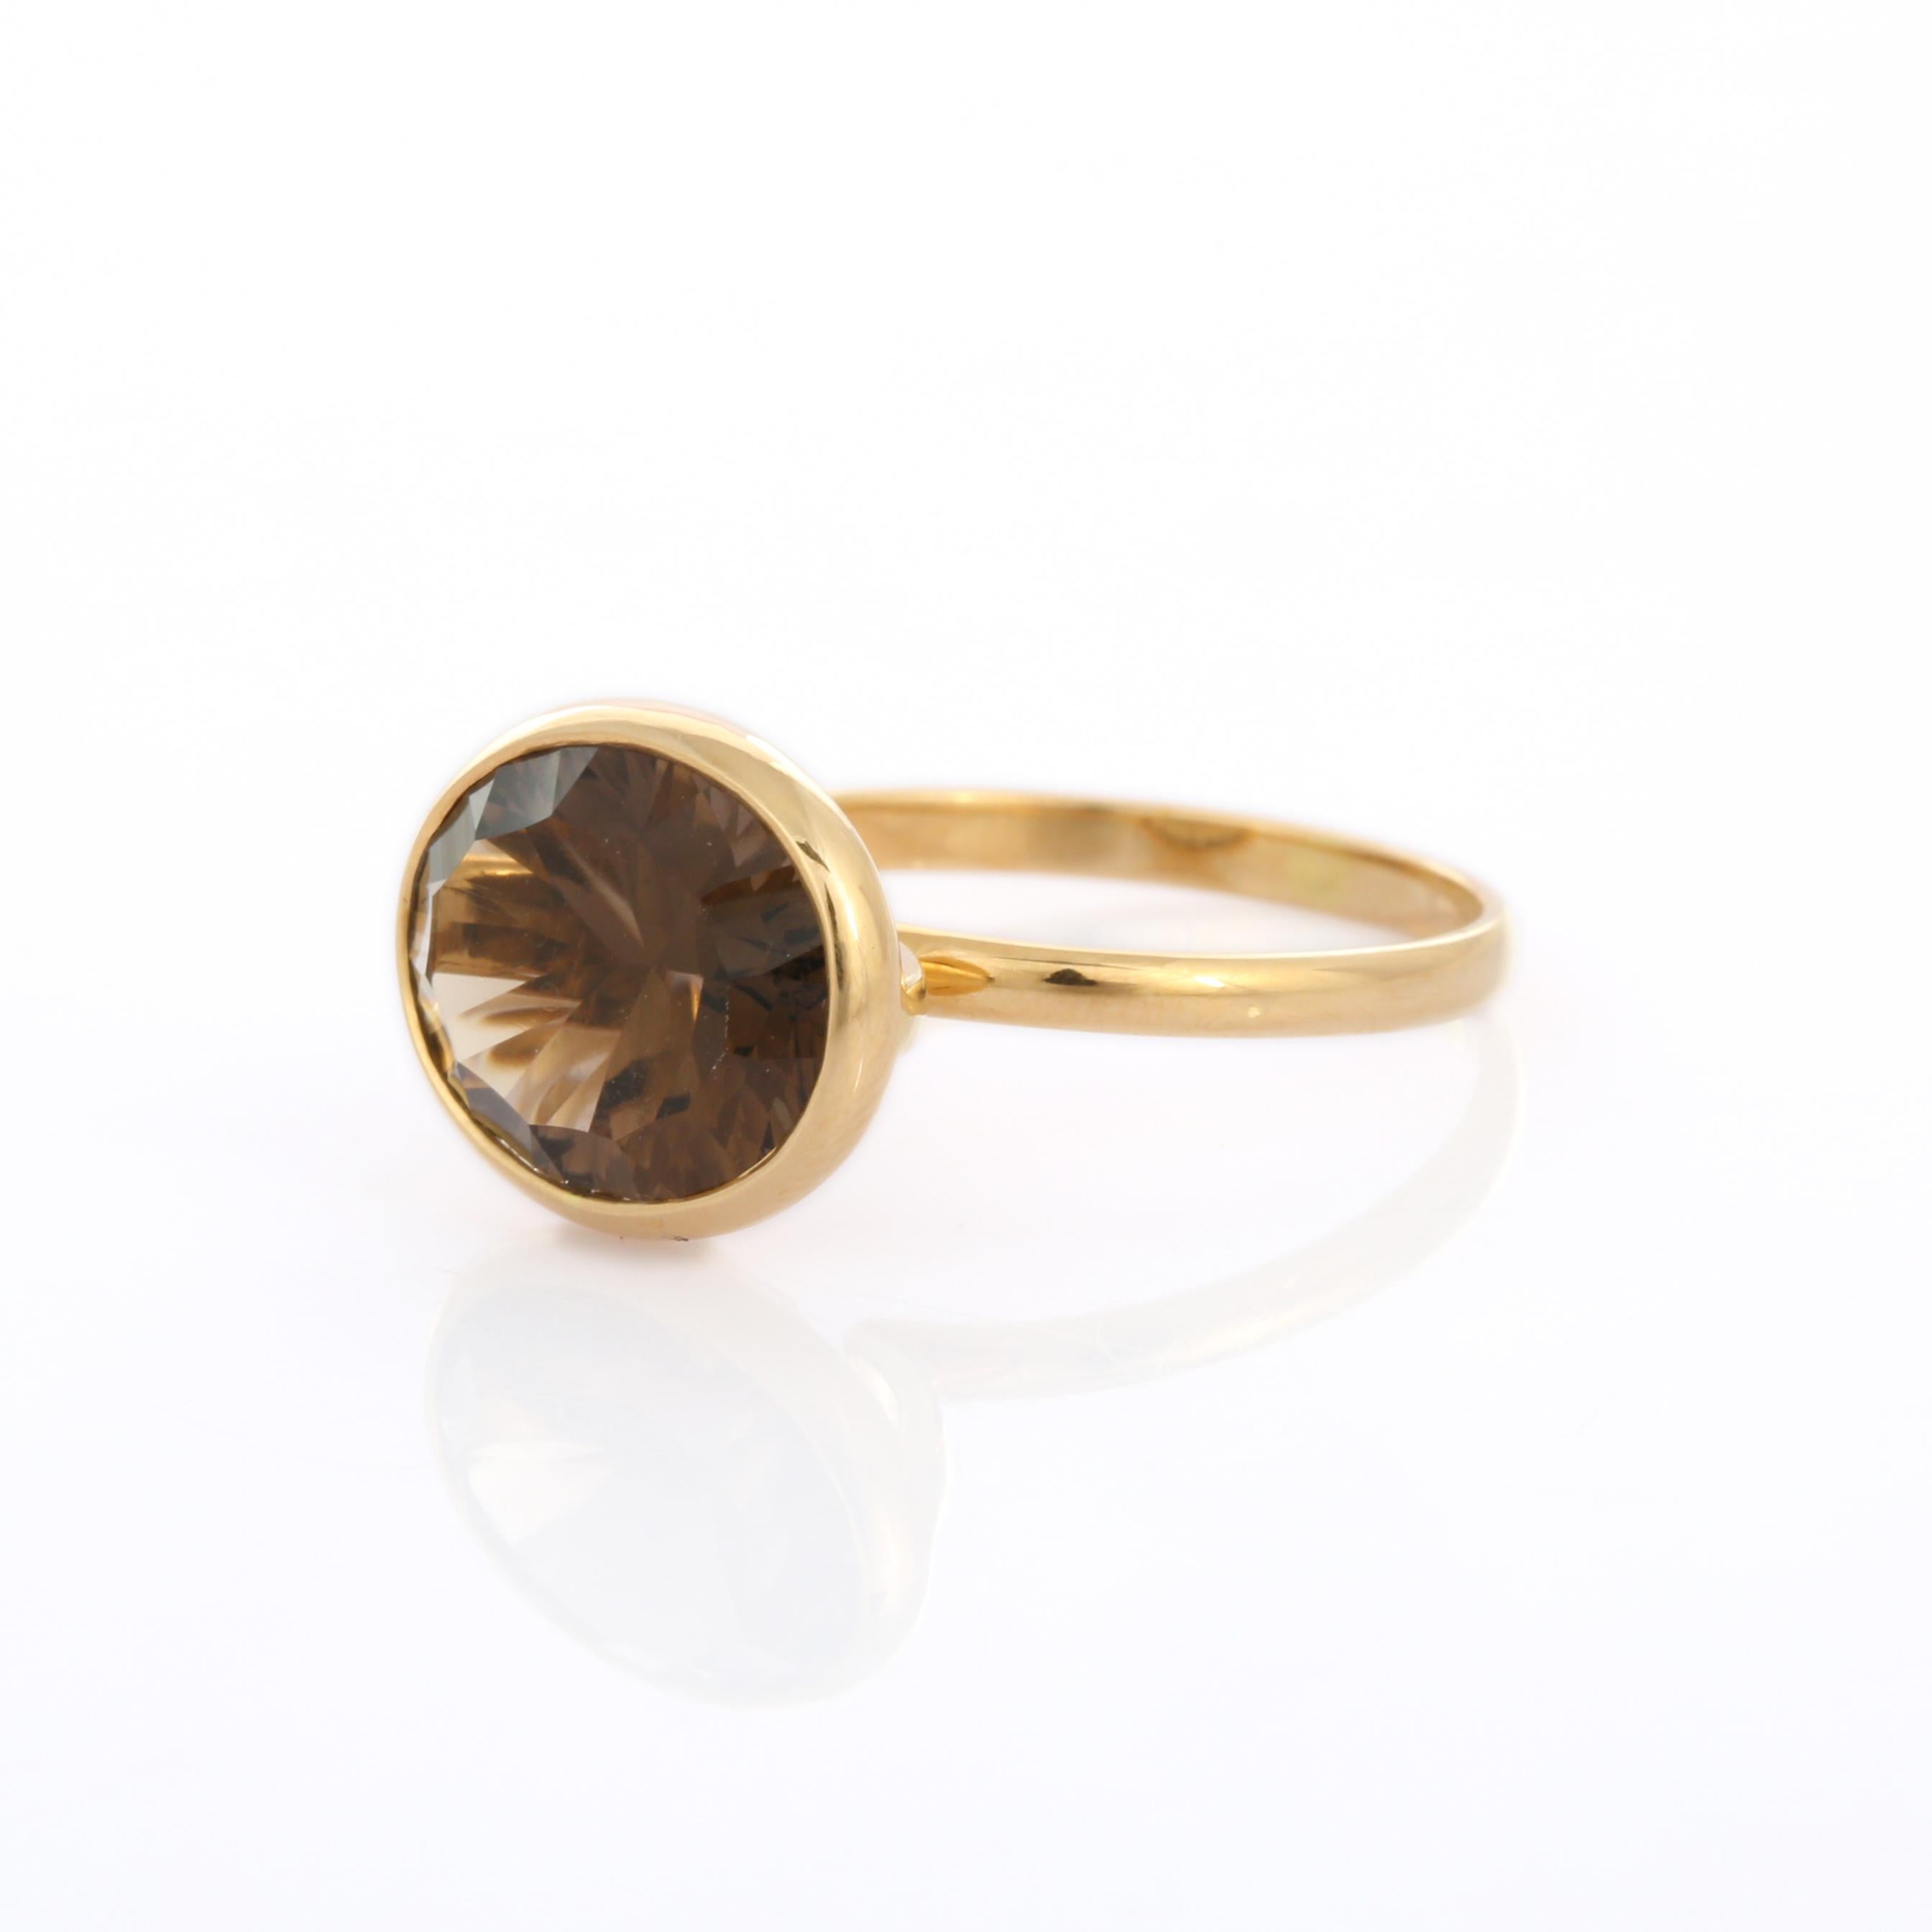 For Sale:  Horizontal Oval Cut Smokey Topaz 18K Yellow Gold Solitaire Ring   2